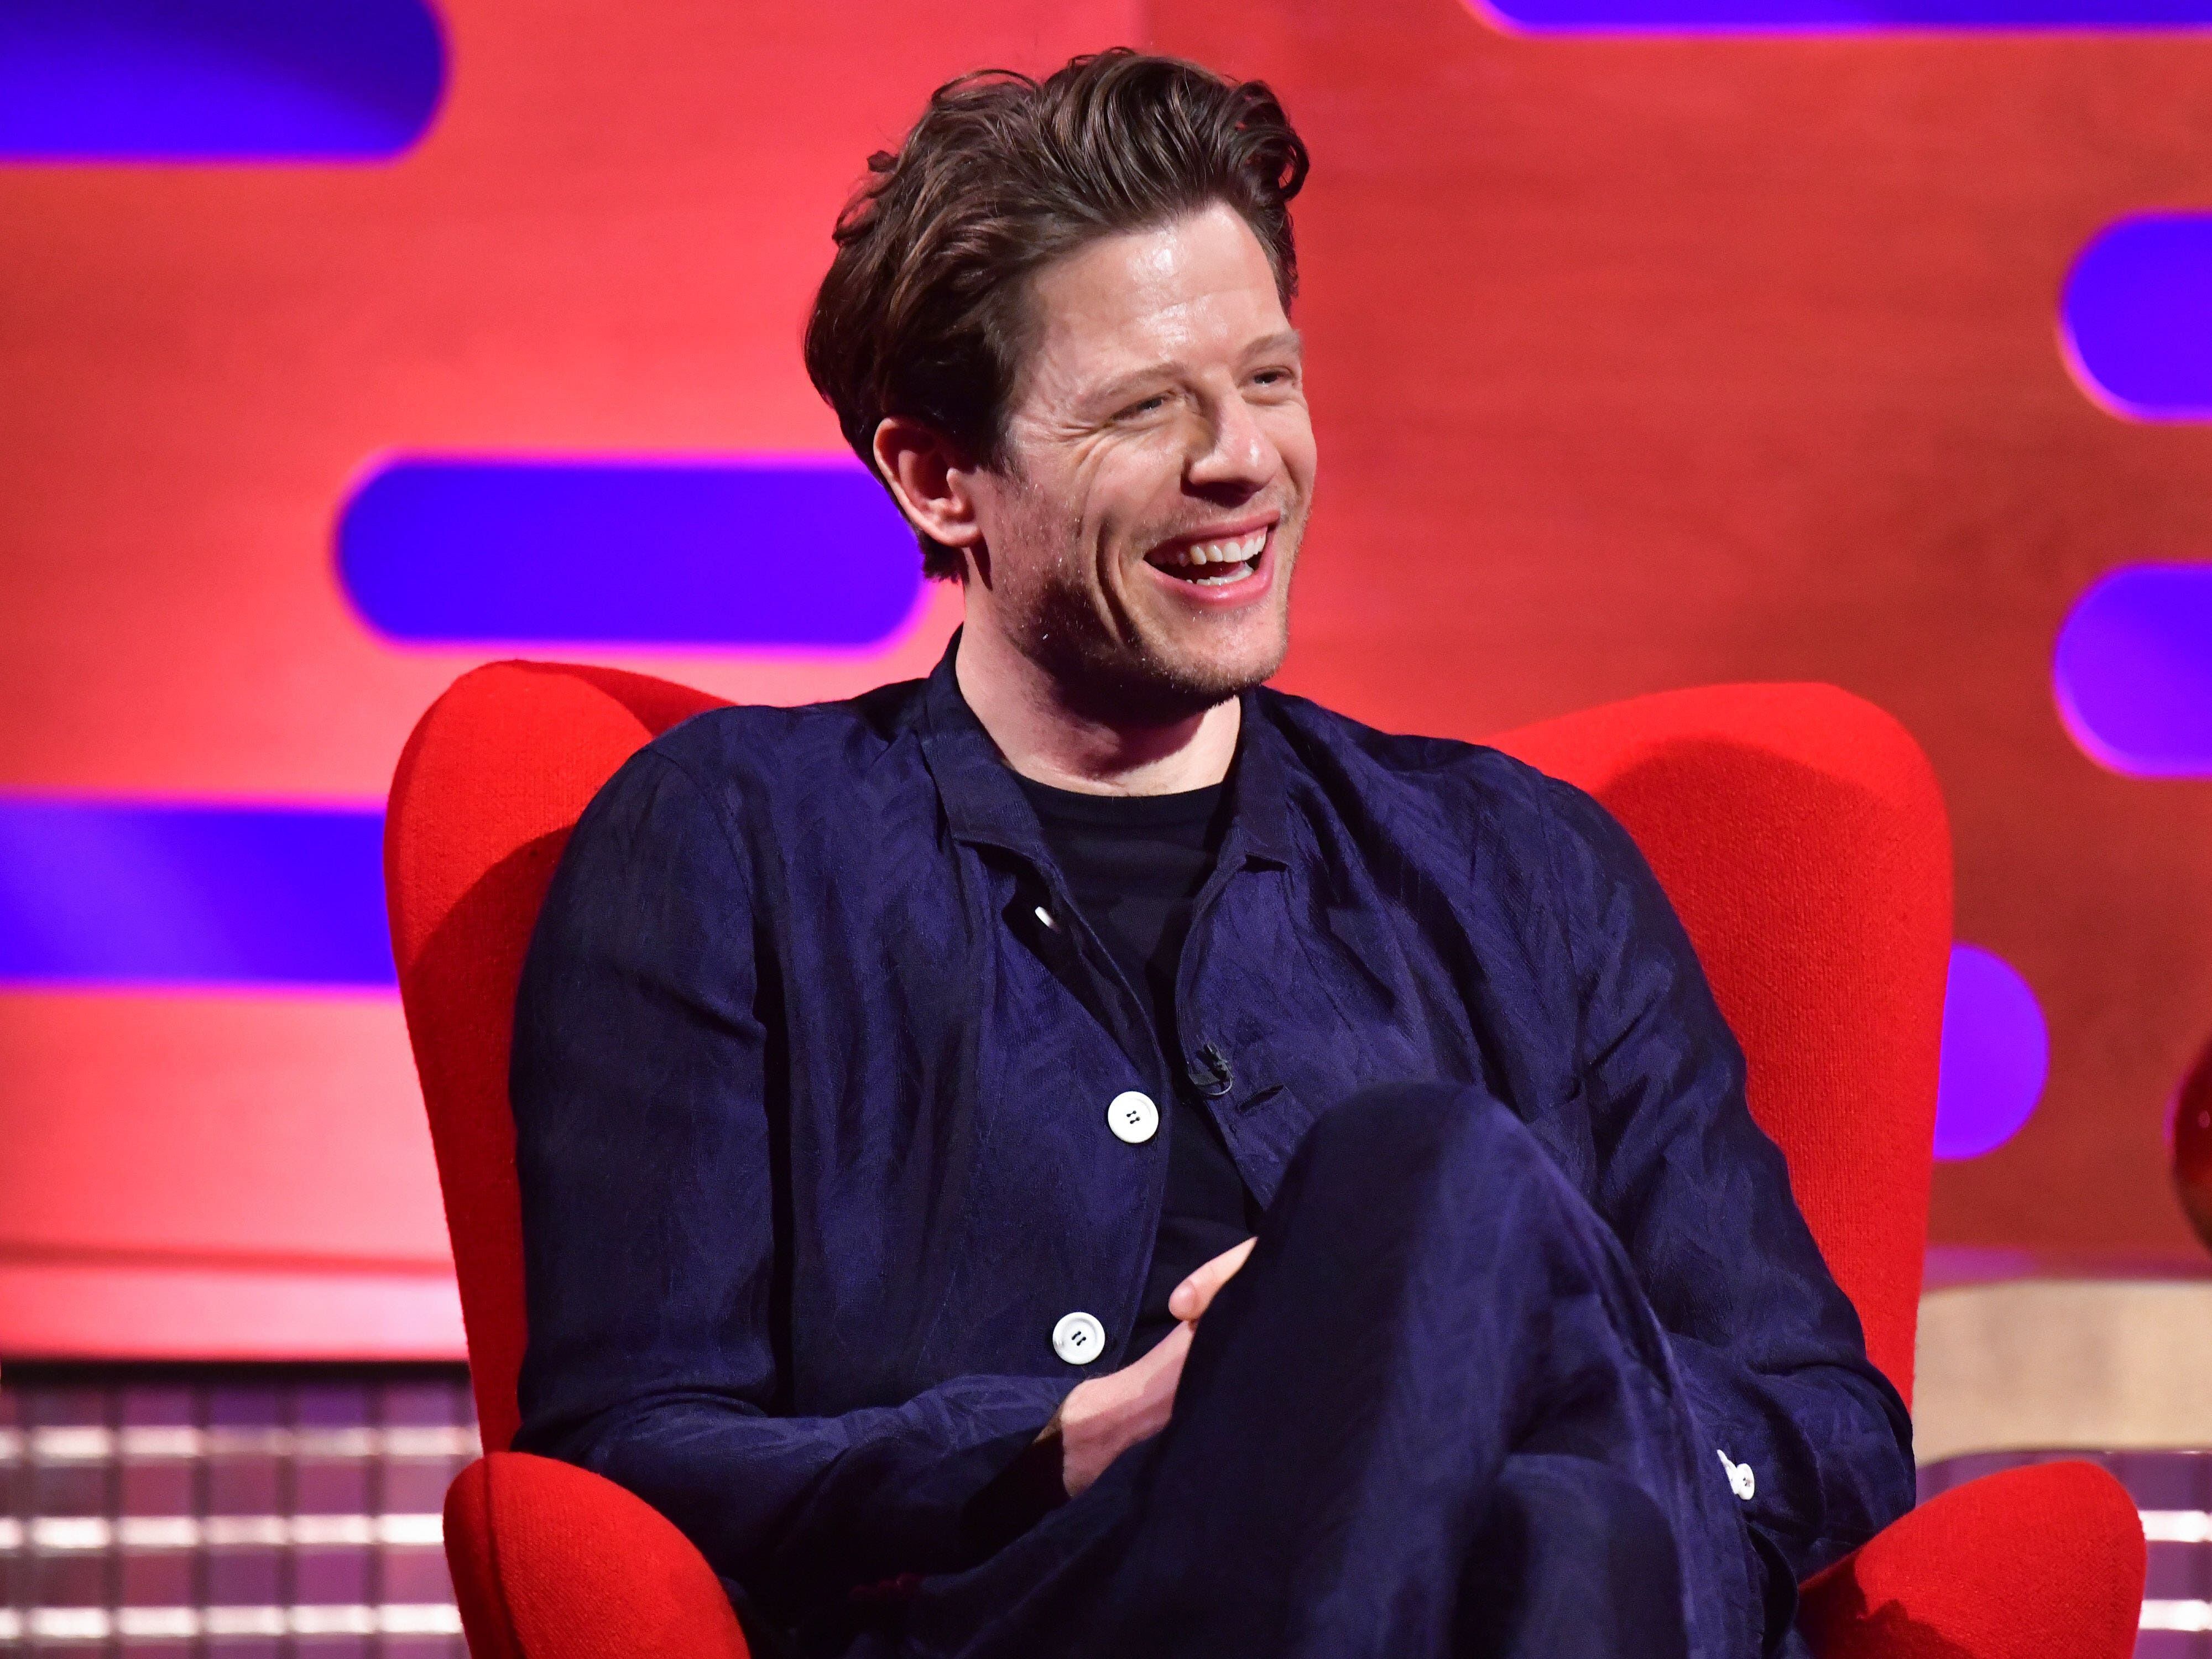 James Norton says he sees diabetes as a dog ahead of reading CBeebies story